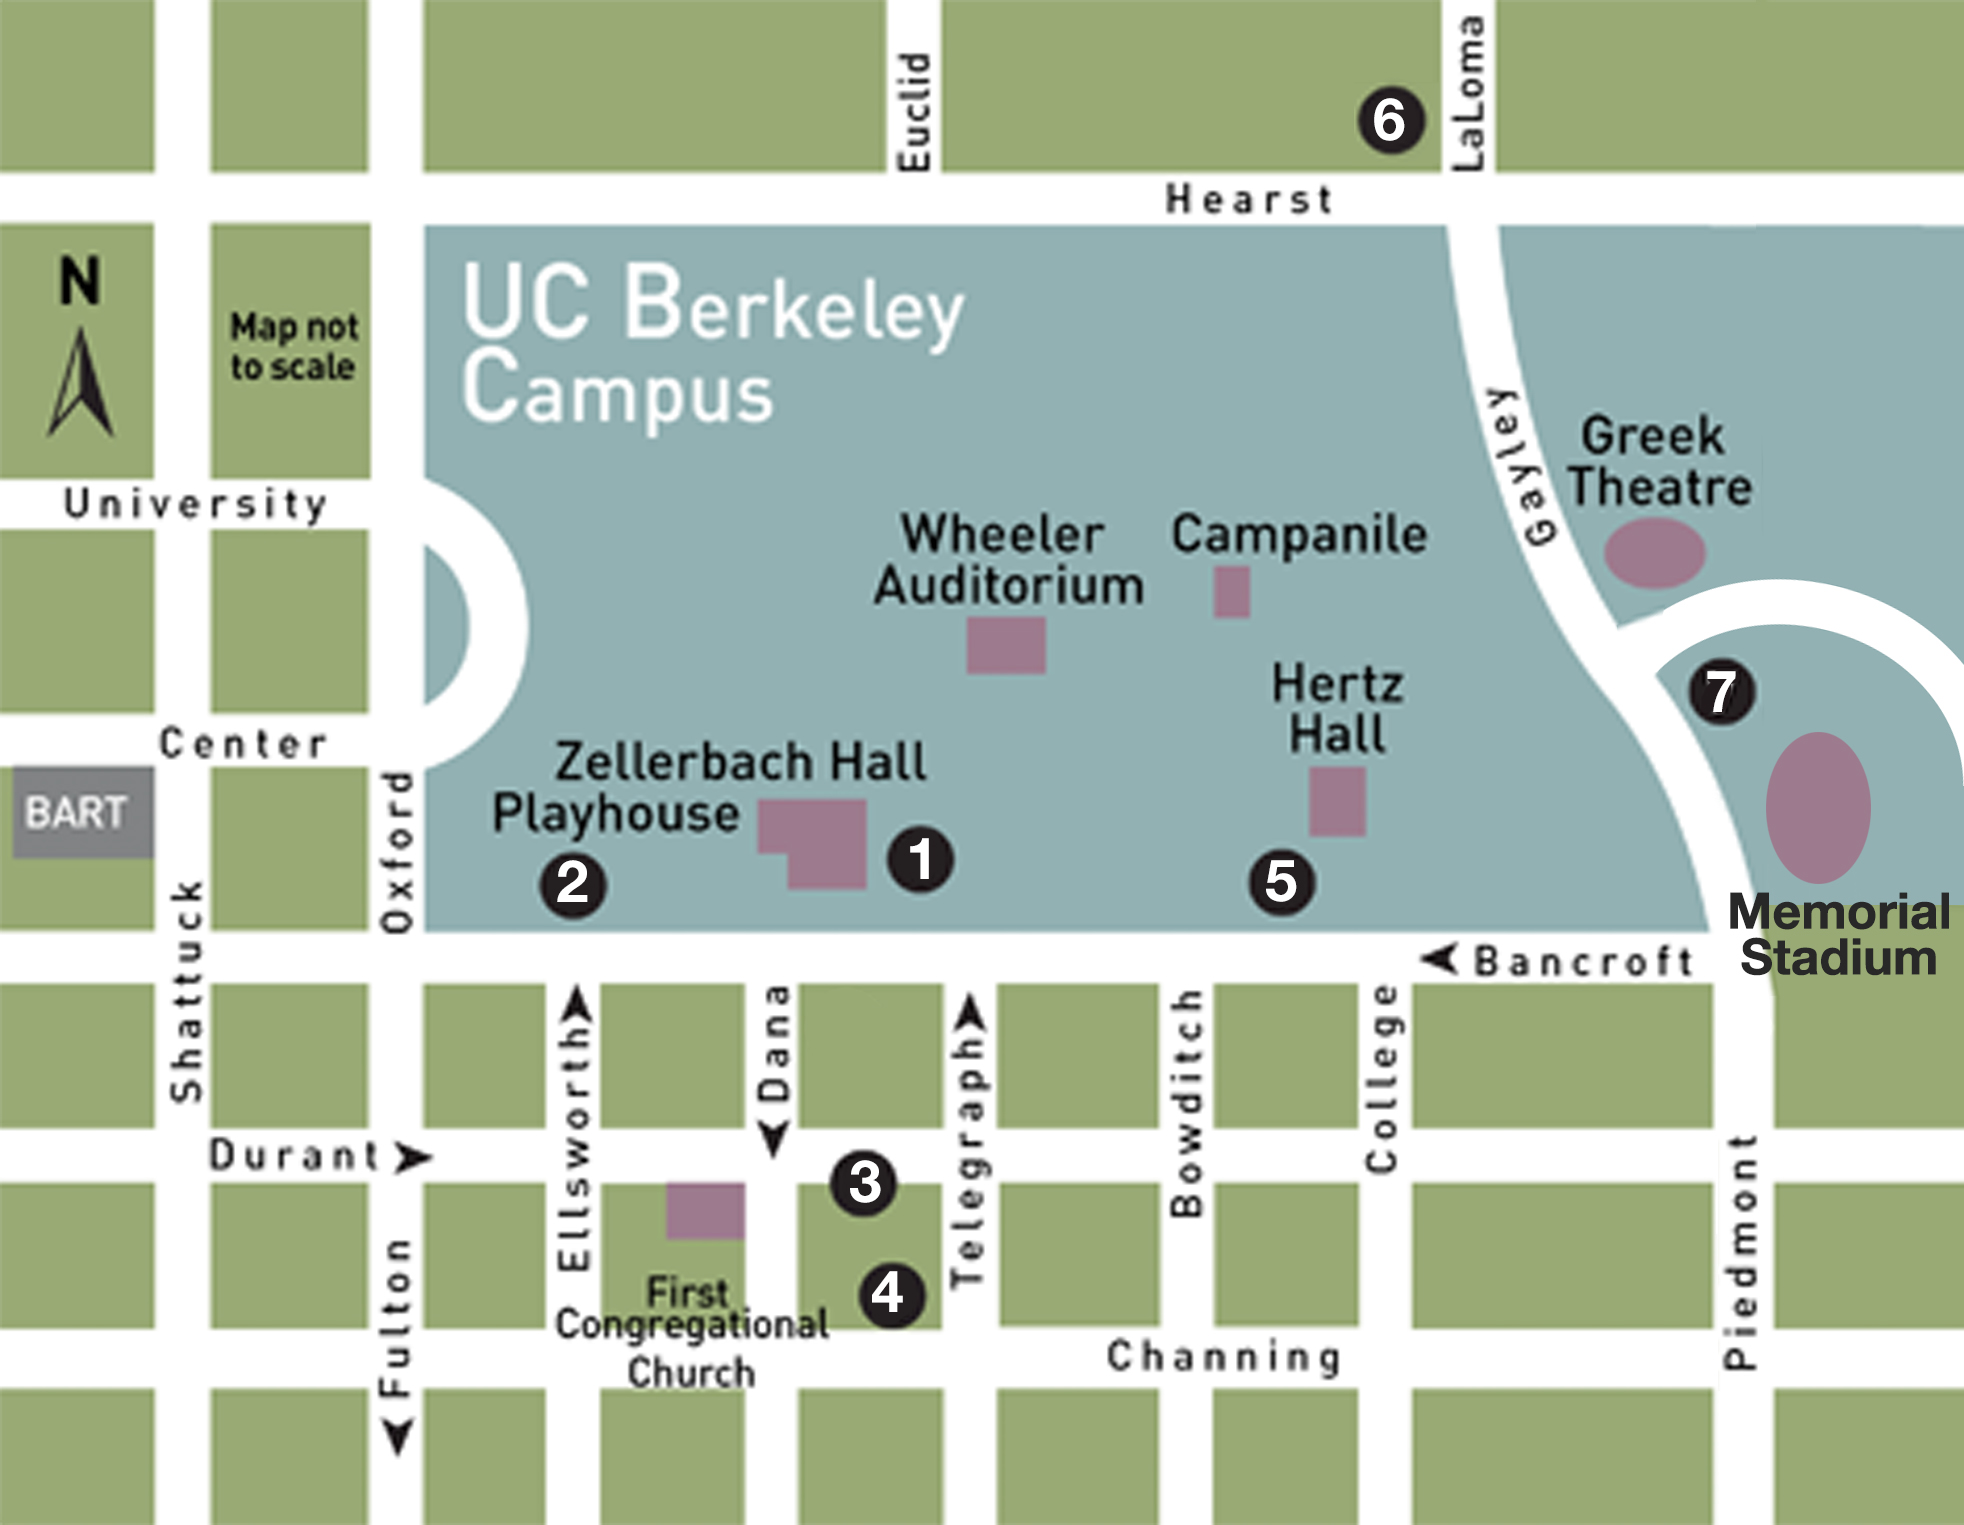 Map of UC Berkeley Campus, Cal Performances venues and parking options